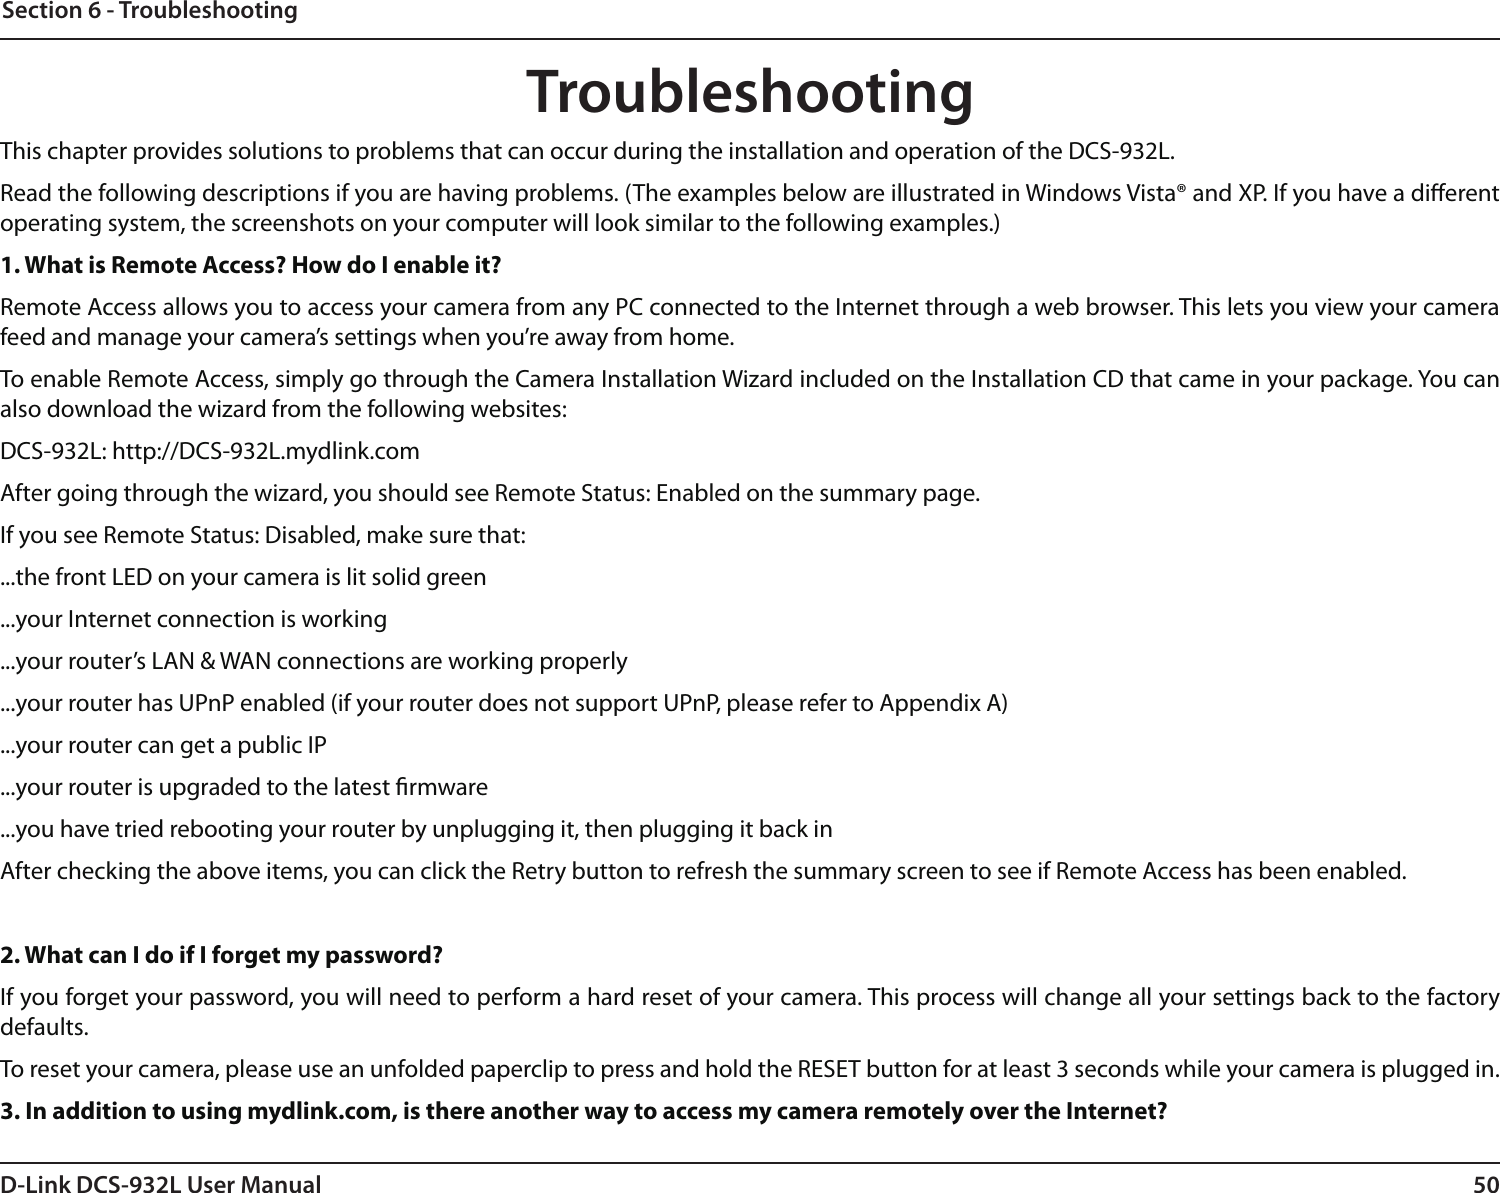 50D-Link DCS-932L User ManualSection 6 - TroubleshootingTroubleshootingThis chapter provides solutions to problems that can occur during the installation and operation of the DCS-932L.Read the following descriptions if you are having problems. (The examples below are illustrated in Windows Vista® and XP. If you have a dierent operating system, the screenshots on your computer will look similar to the following examples.)1. What is Remote Access? How do I enable it?Remote Access allows you to access your camera from any PC connected to the Internet through a web browser. This lets you view your camera feed and manage your camera’s settings when you’re away from home. To enable Remote Access, simply go through the Camera Installation Wizard included on the Installation CD that came in your package. You can also download the wizard from the following websites:DCS-932L: http://DCS-932L.mydlink.comAfter going through the wizard, you should see Remote Status: Enabled on the summary page.If you see Remote Status: Disabled, make sure that:...the front LED on your camera is lit solid green...your Internet connection is working...your router’s LAN &amp; WAN connections are working properly...your router has UPnP enabled (if your router does not support UPnP, please refer to Appendix A)...your router can get a public IP...your router is upgraded to the latest rmware...you have tried rebooting your router by unplugging it, then plugging it back inAfter checking the above items, you can click the Retry button to refresh the summary screen to see if Remote Access has been enabled.2. What can I do if I forget my password?If you forget your password, you will need to perform a hard reset of your camera. This process will change all your settings back to the factory defaults.To reset your camera, please use an unfolded paperclip to press and hold the RESET button for at least 3 seconds while your camera is plugged in.3. In addition to using mydlink.com, is there another way to access my camera remotely over the Internet?